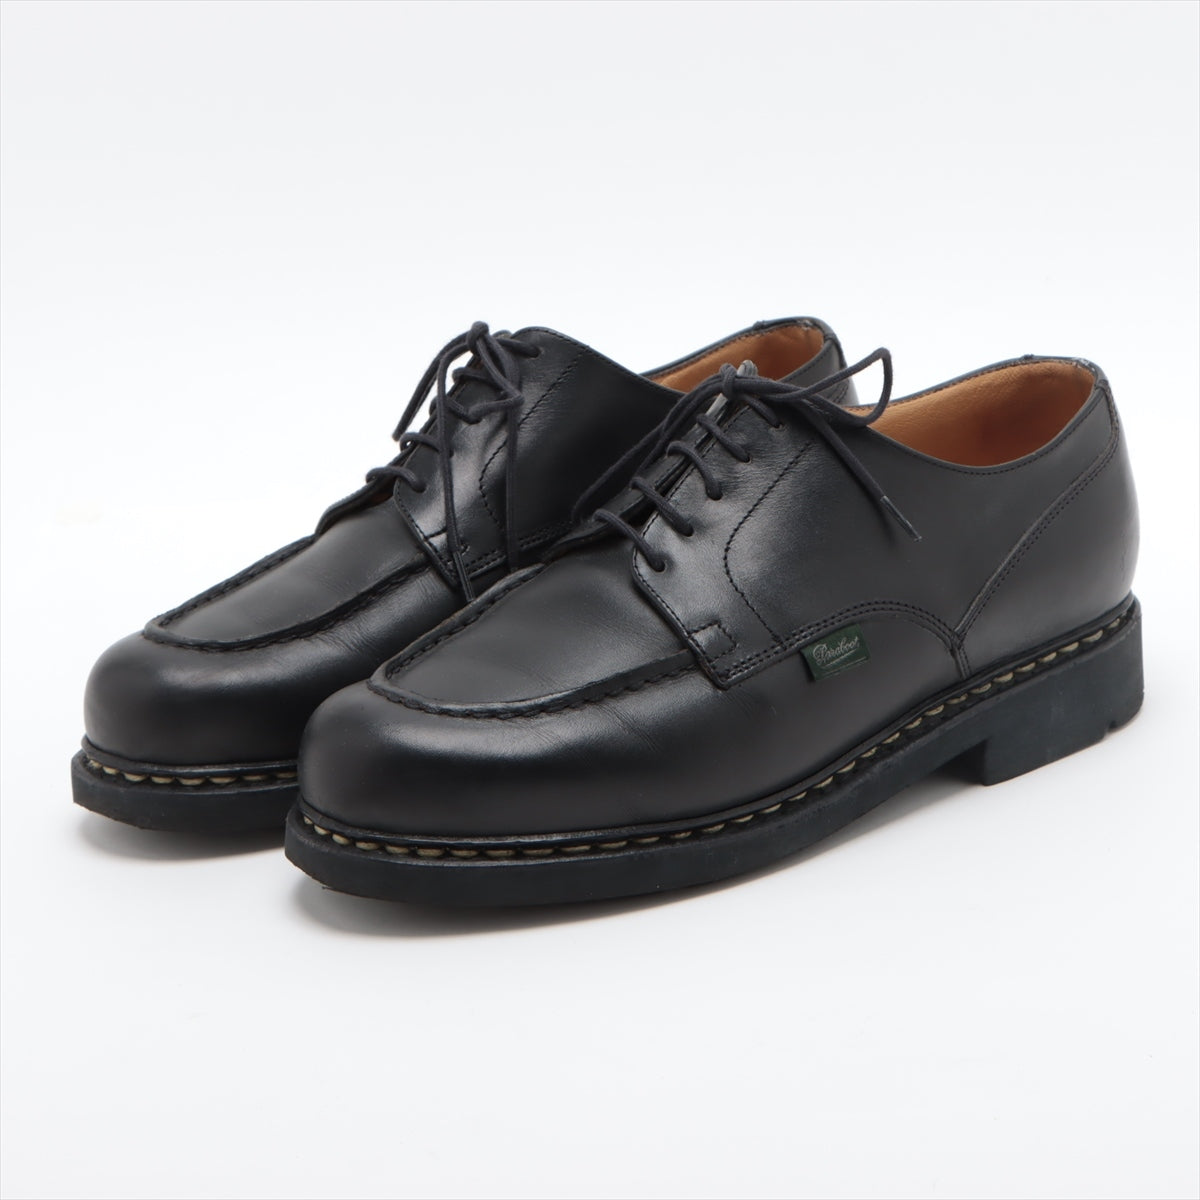 Paraboot Chambord Leather Leather shoes 7 Men's Black With genuine shoe tree Is there dirt on the insole